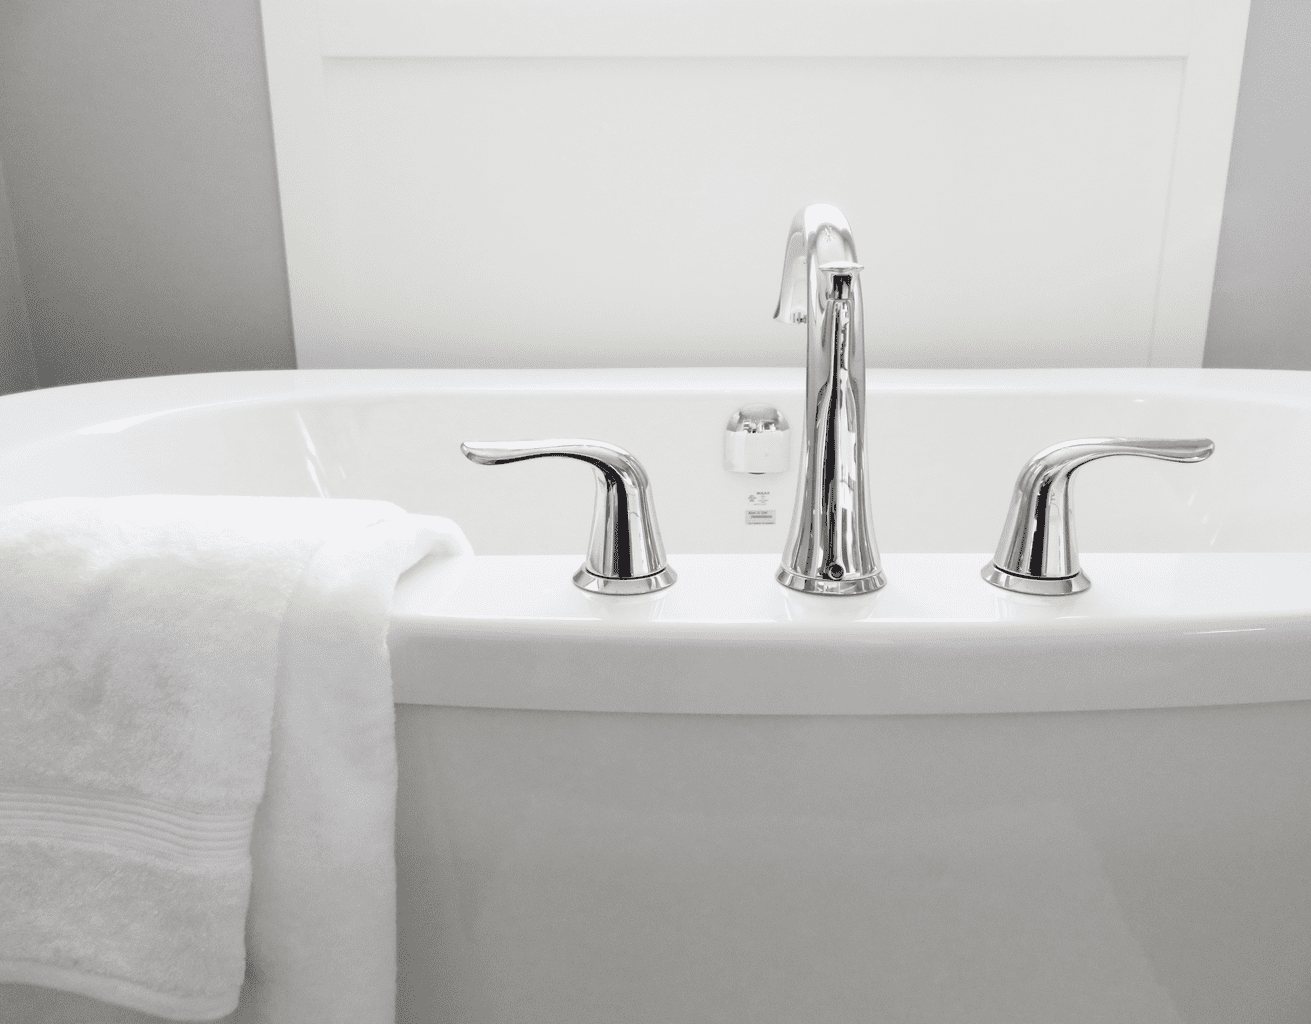 After cleaning your bathroom and tub with bleach, air dry the area to eliminate toxic fumes 